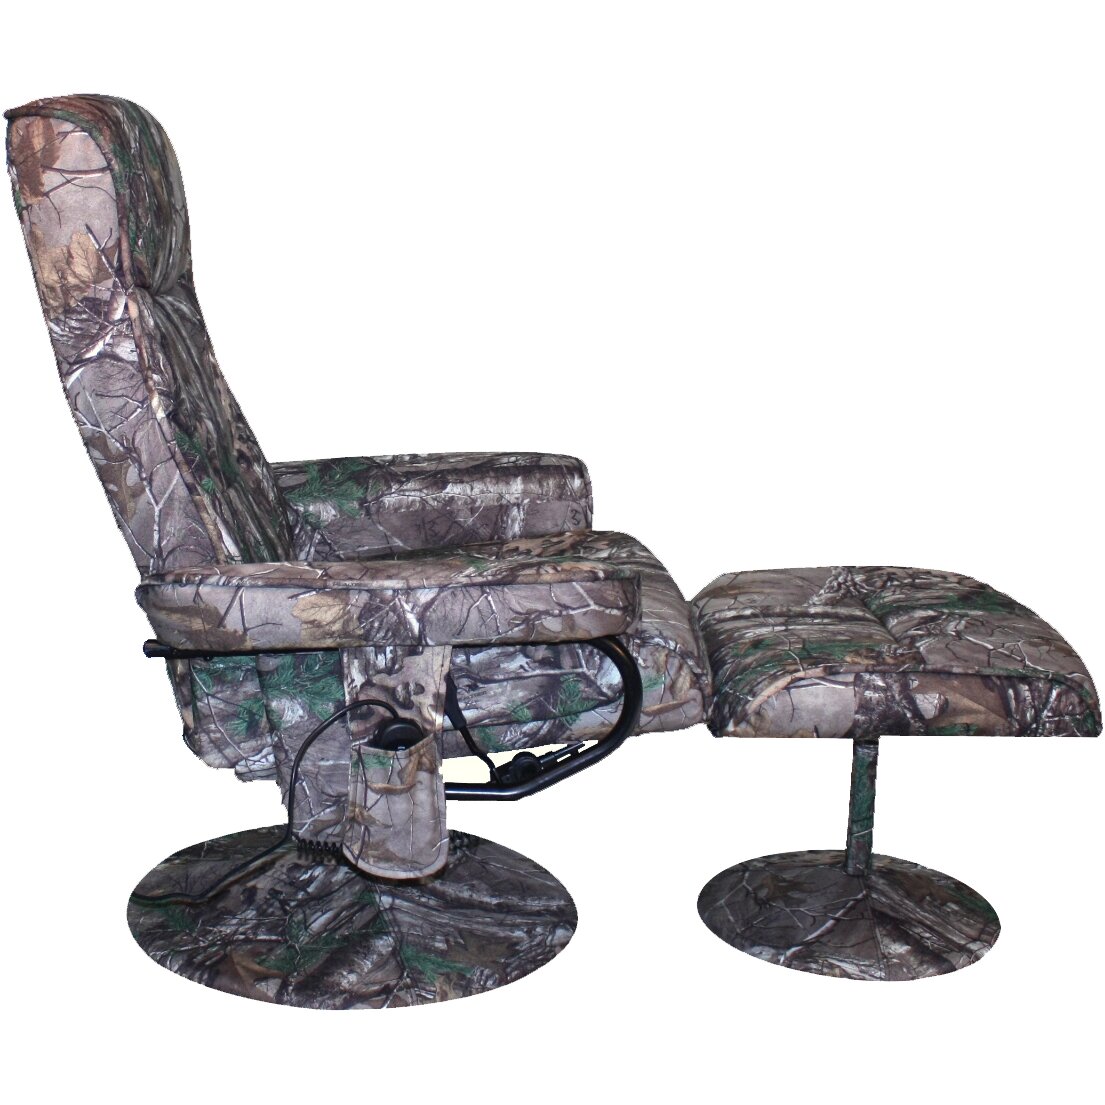 Comfort Products Realtree© Relaxzen Heated And Reclining Massage Chair With Ottoman And Reviews 